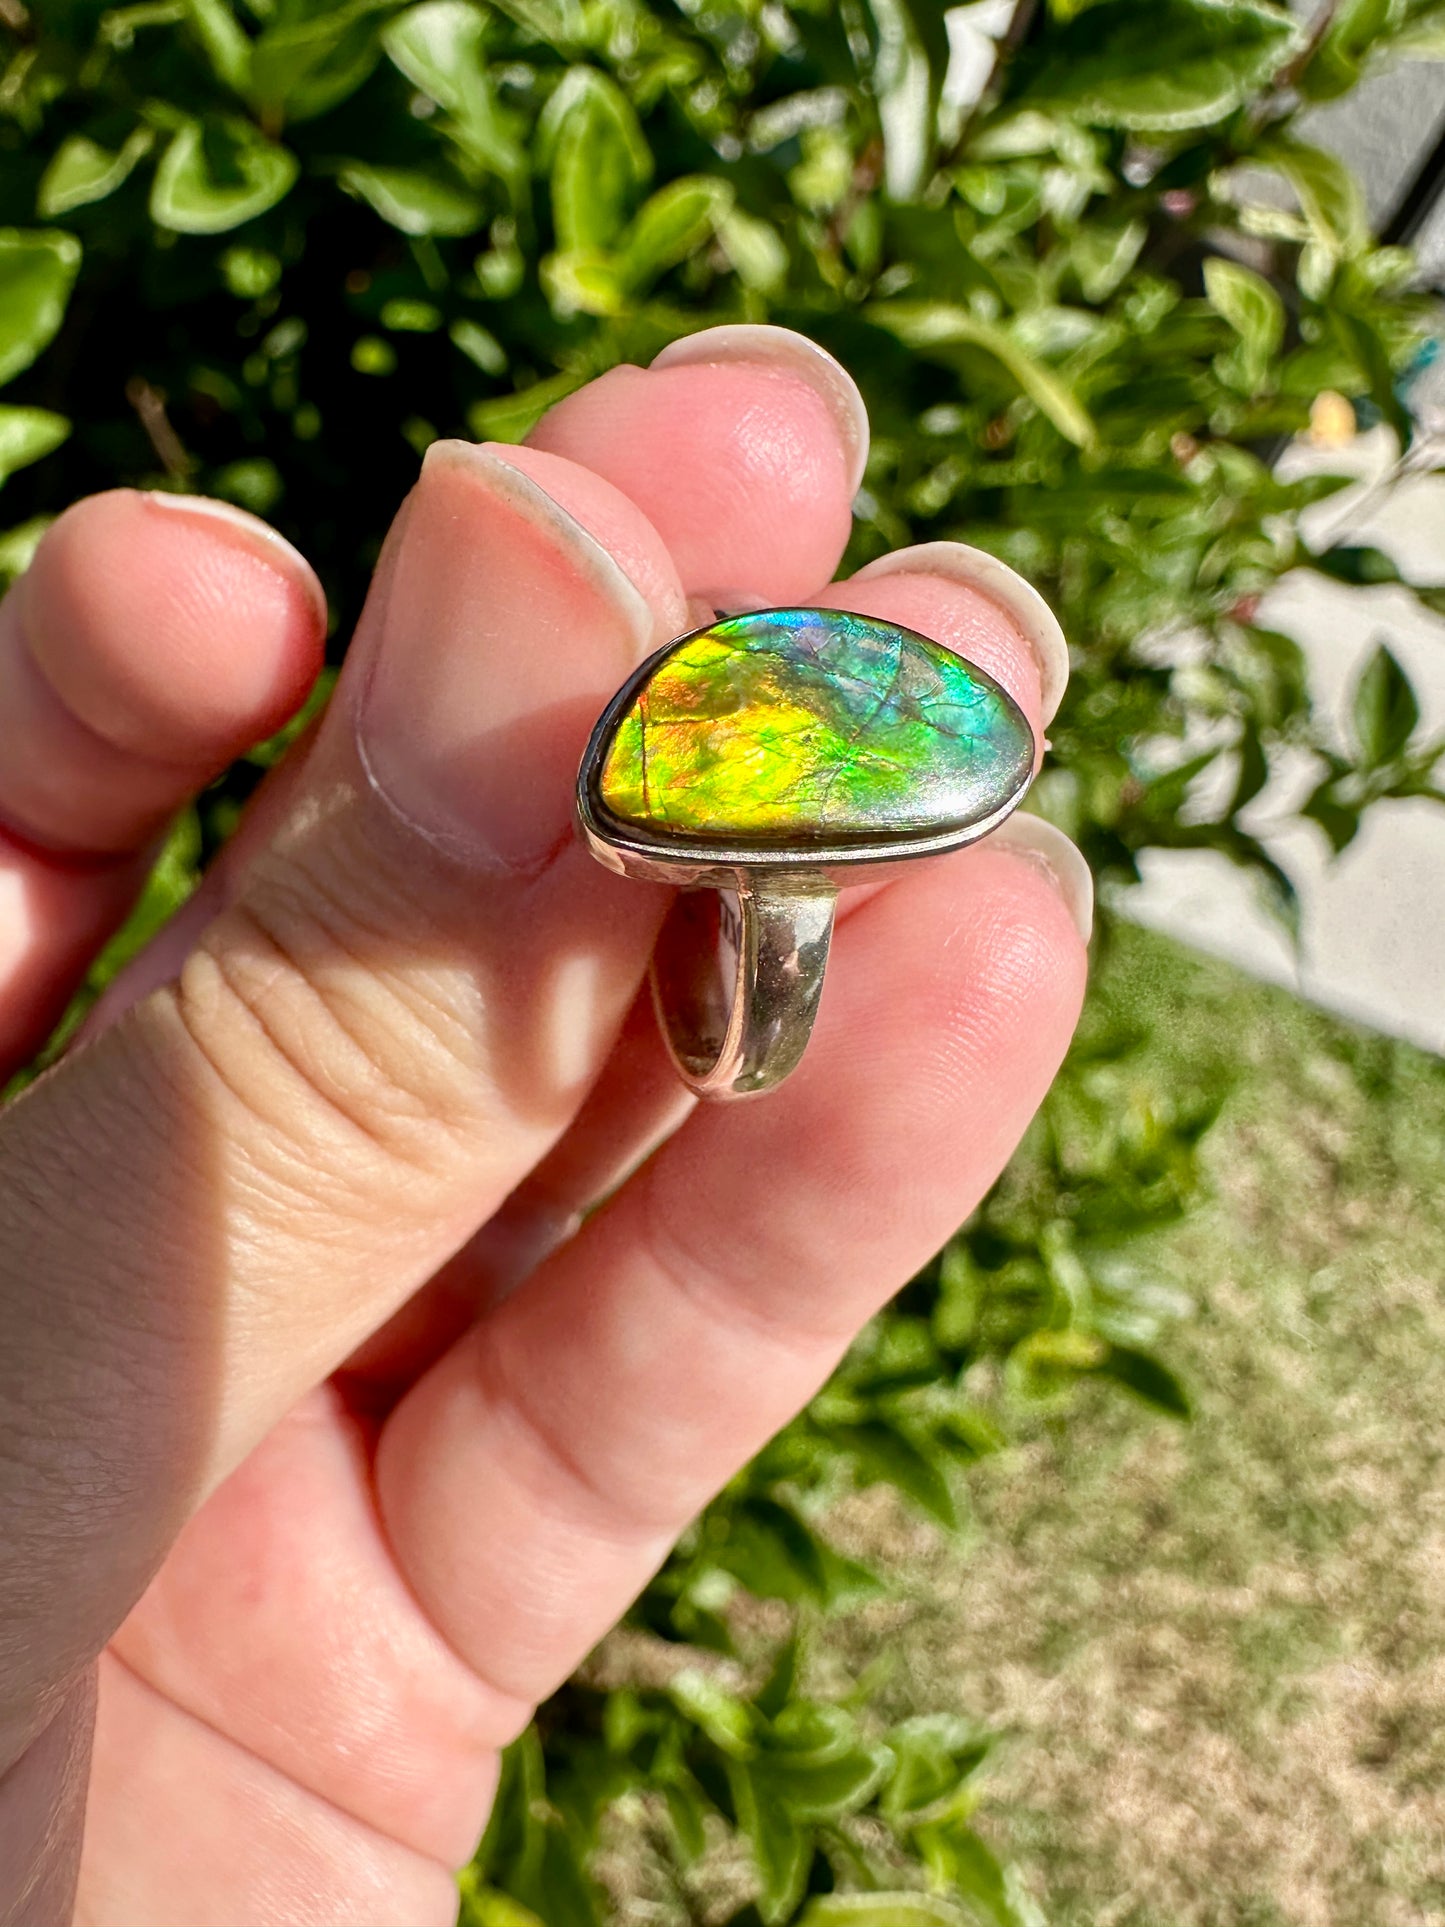 Ammolite Ring in Sterling Silver - Radiant Size 8  - A Dazzling Display of Color, Perfect for Adding a Touch of Elegance to Any Outfit